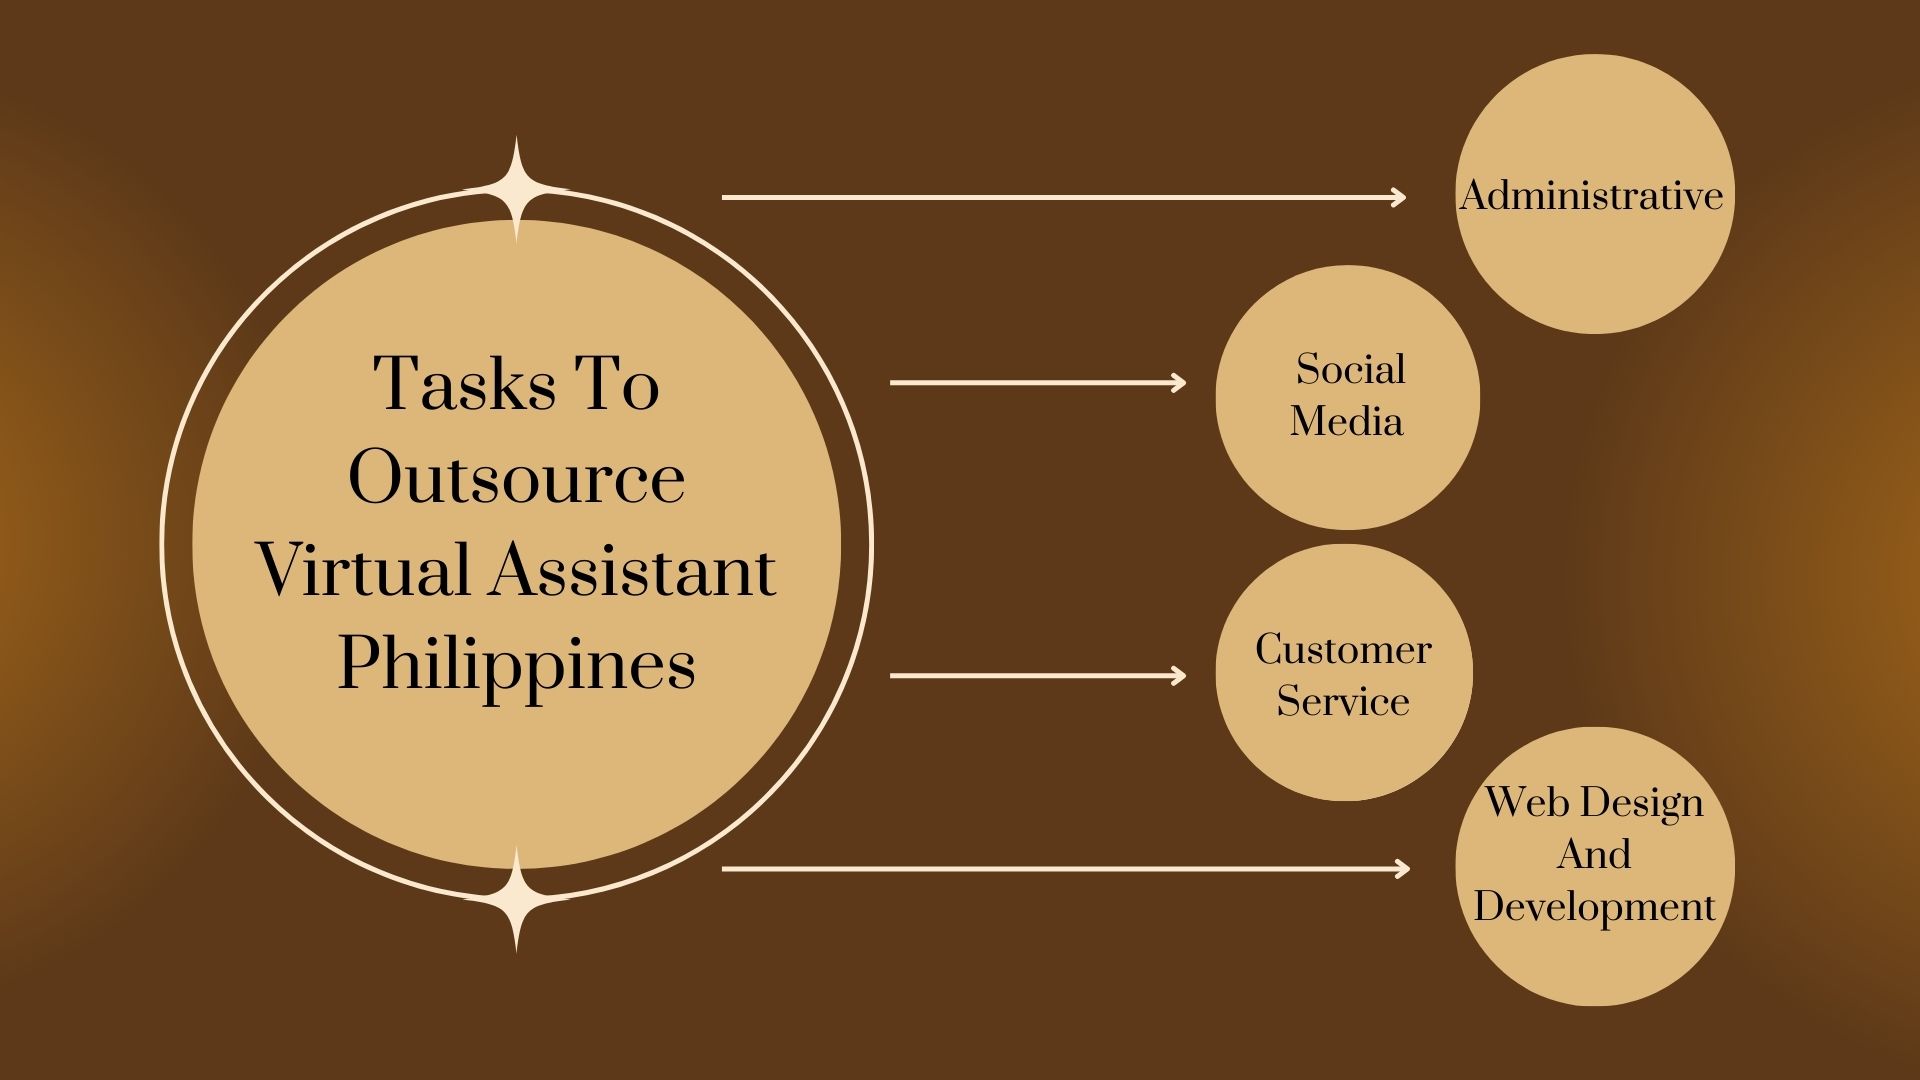 Tasks to Outsource Virtual Assistant Philippines
